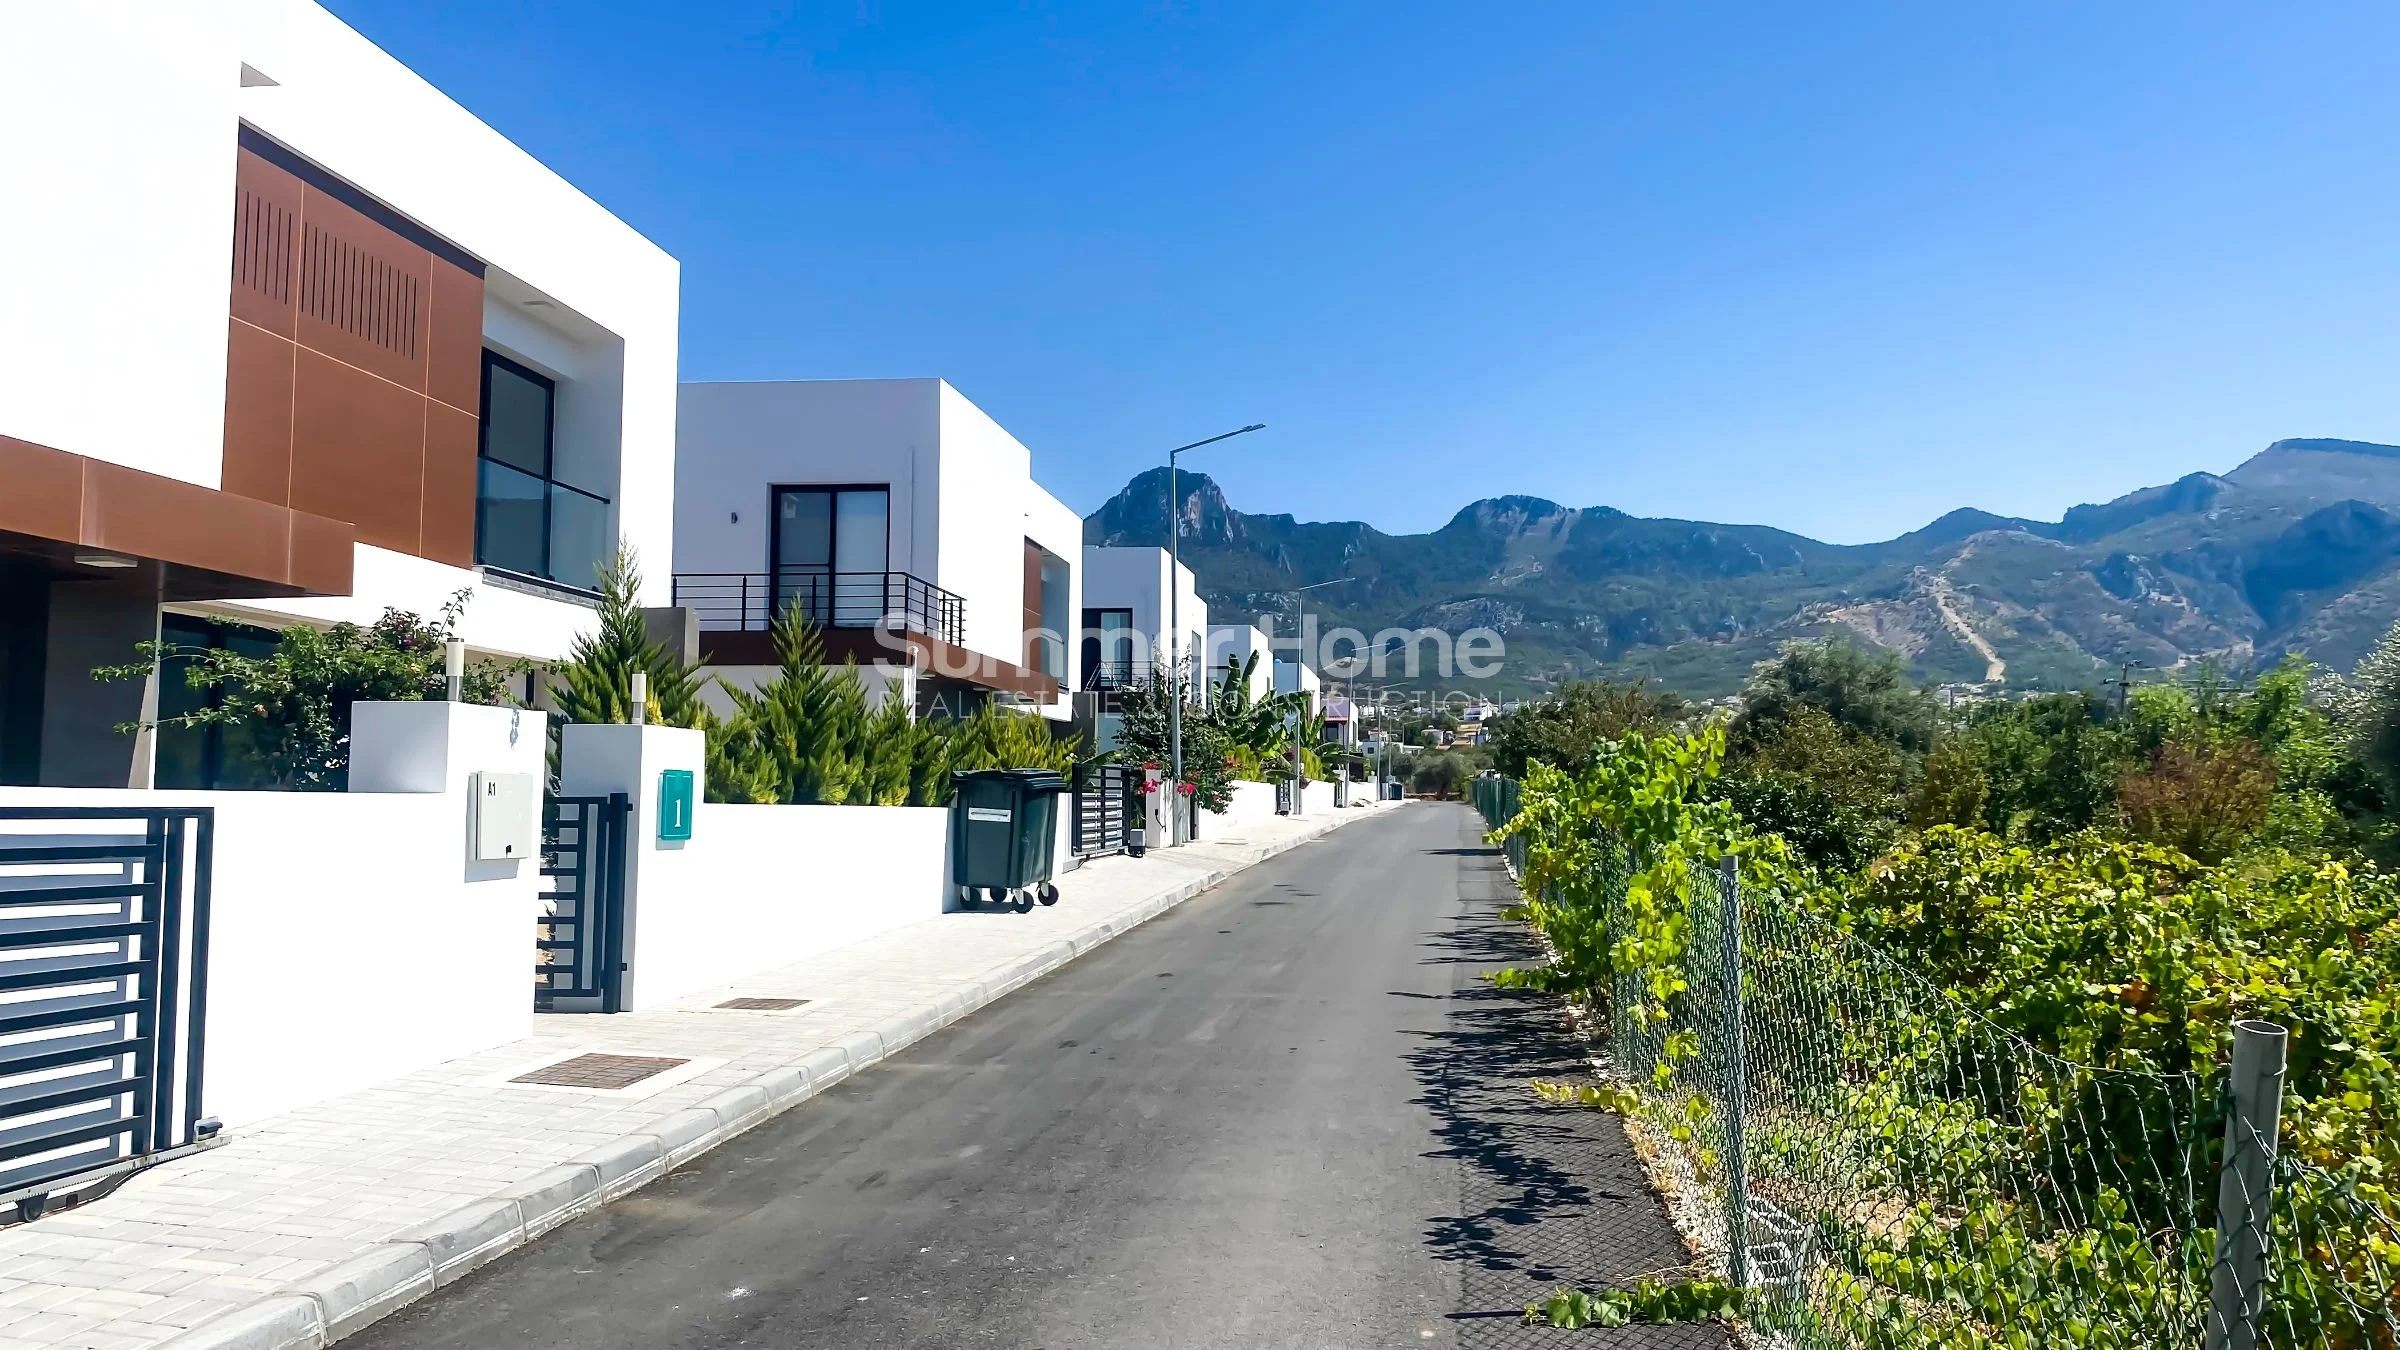 Recently completed well-located villas in Kyrenia, Cyprus General - 3